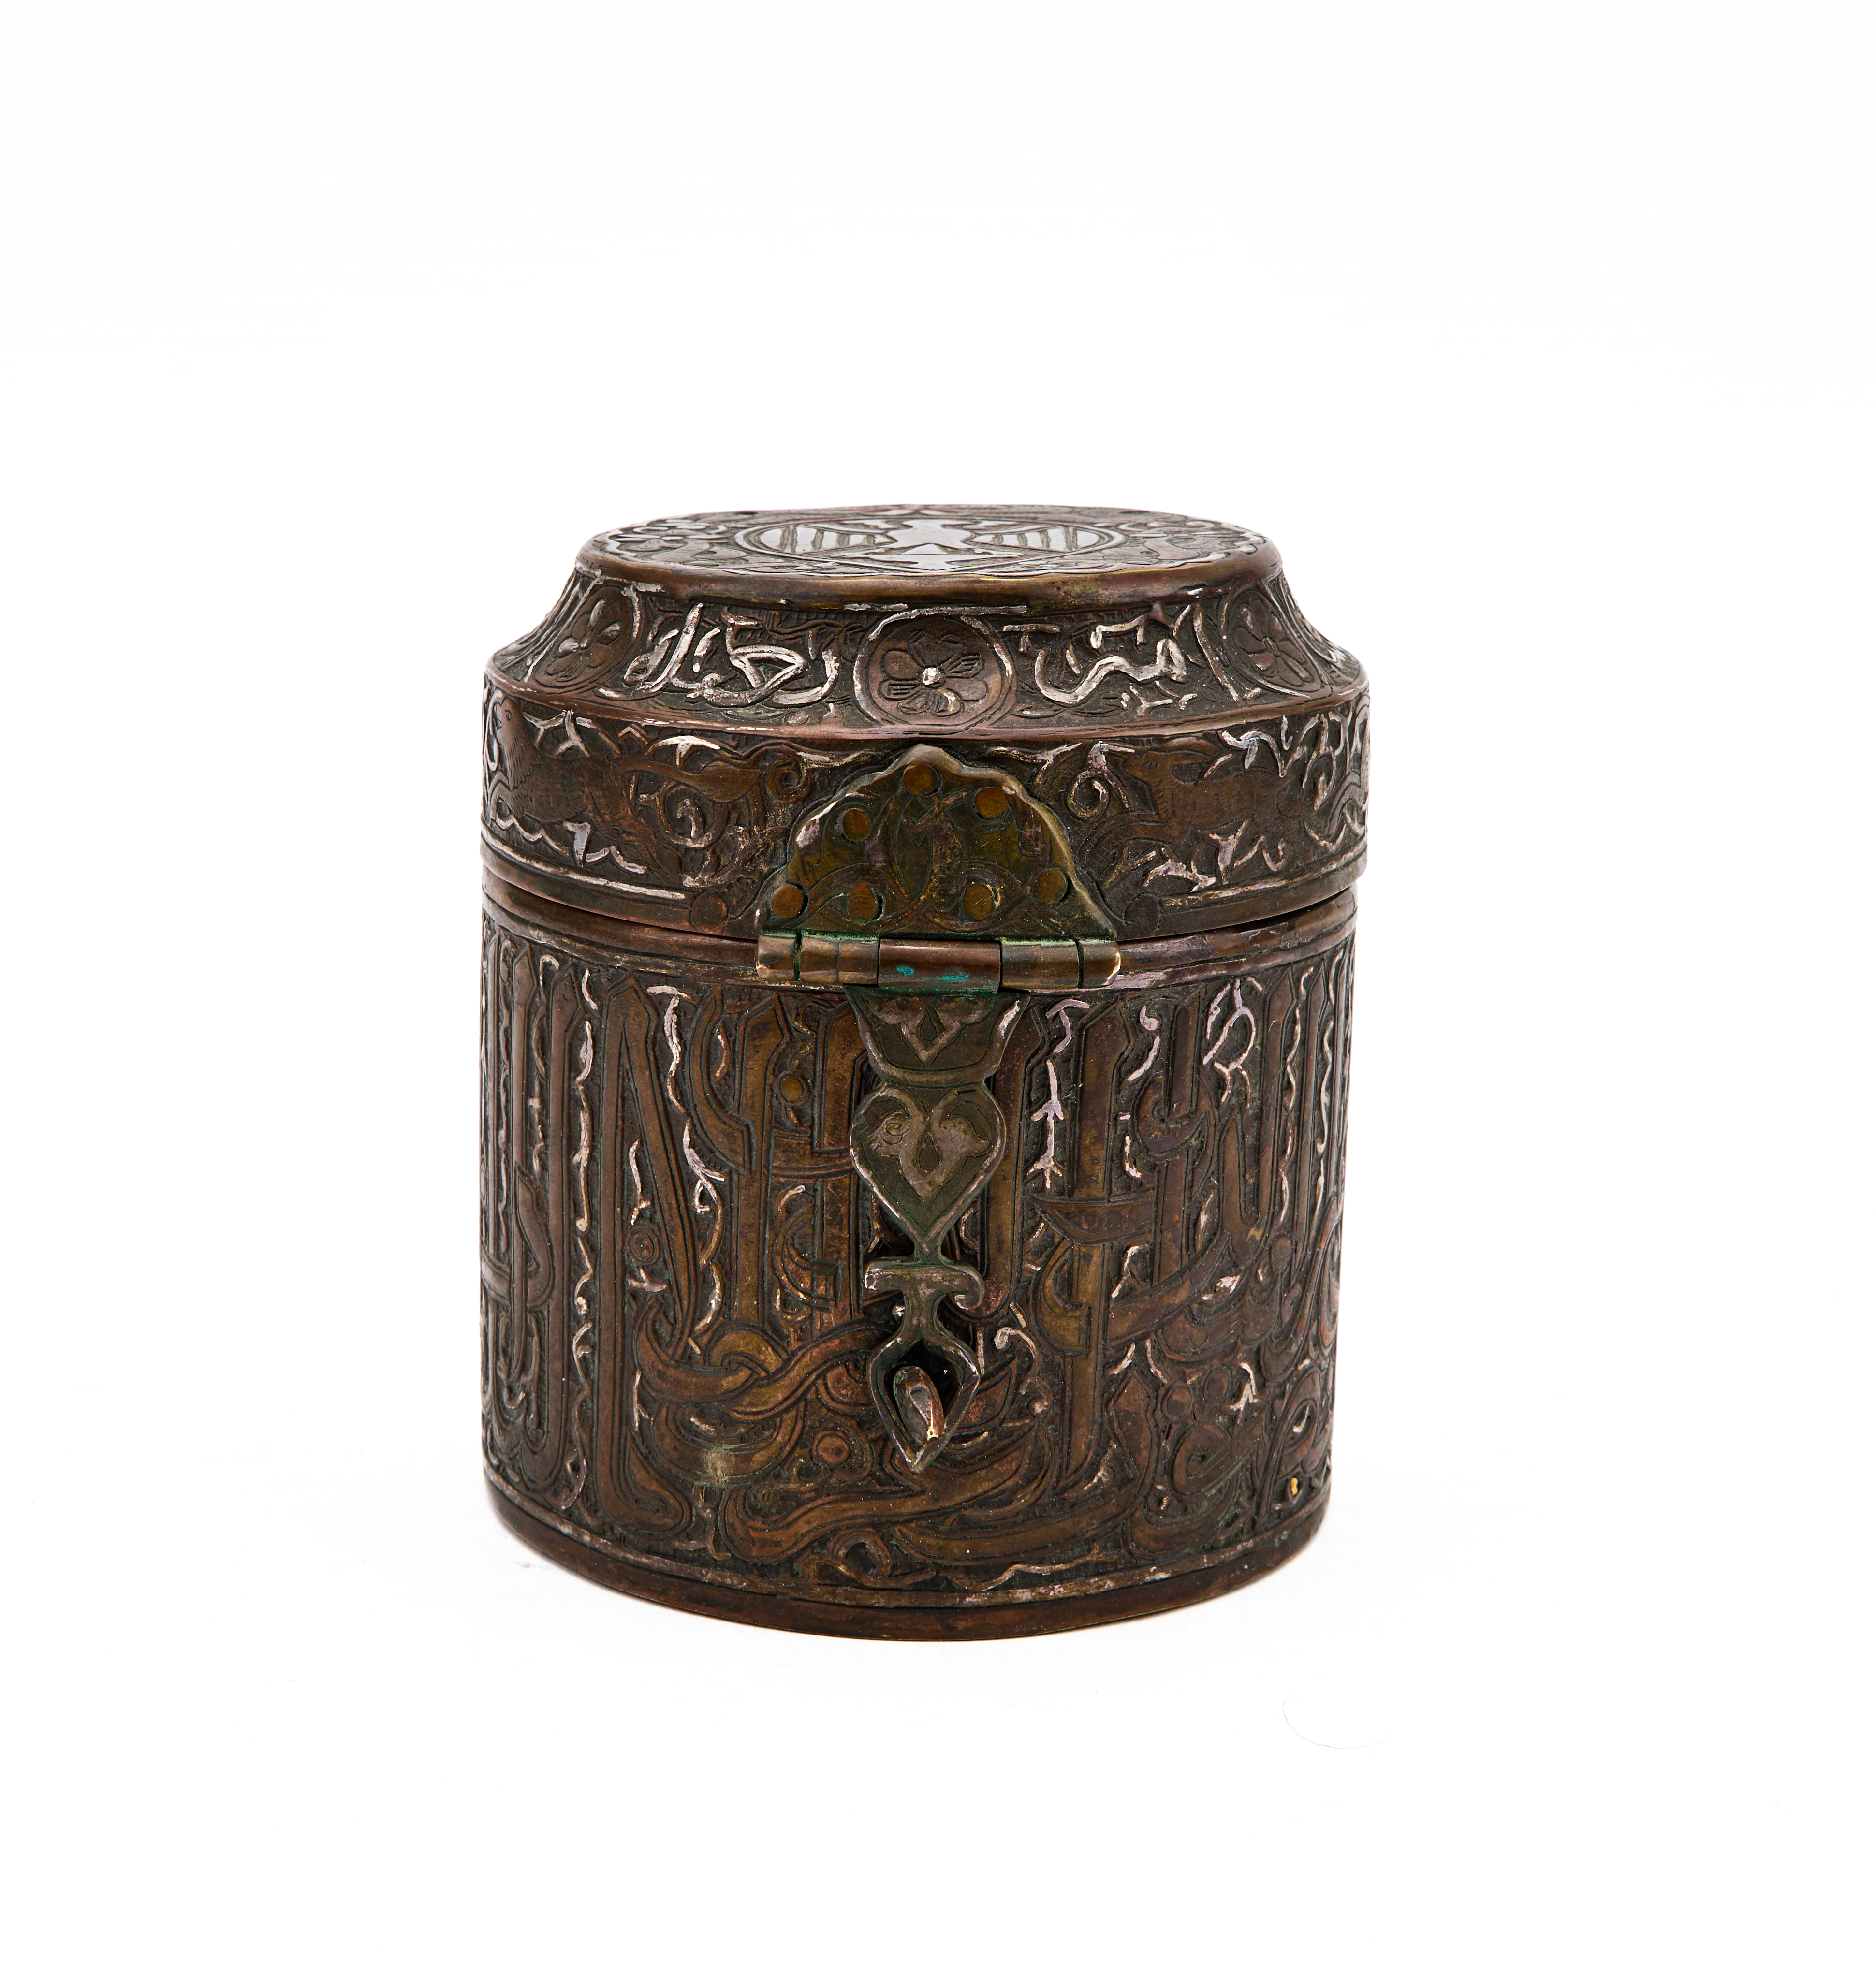 A SILVER INLAID SELJUK BRONZE INKWELL PENDANT, PERSIA, 12TH CENTURY - Image 3 of 8